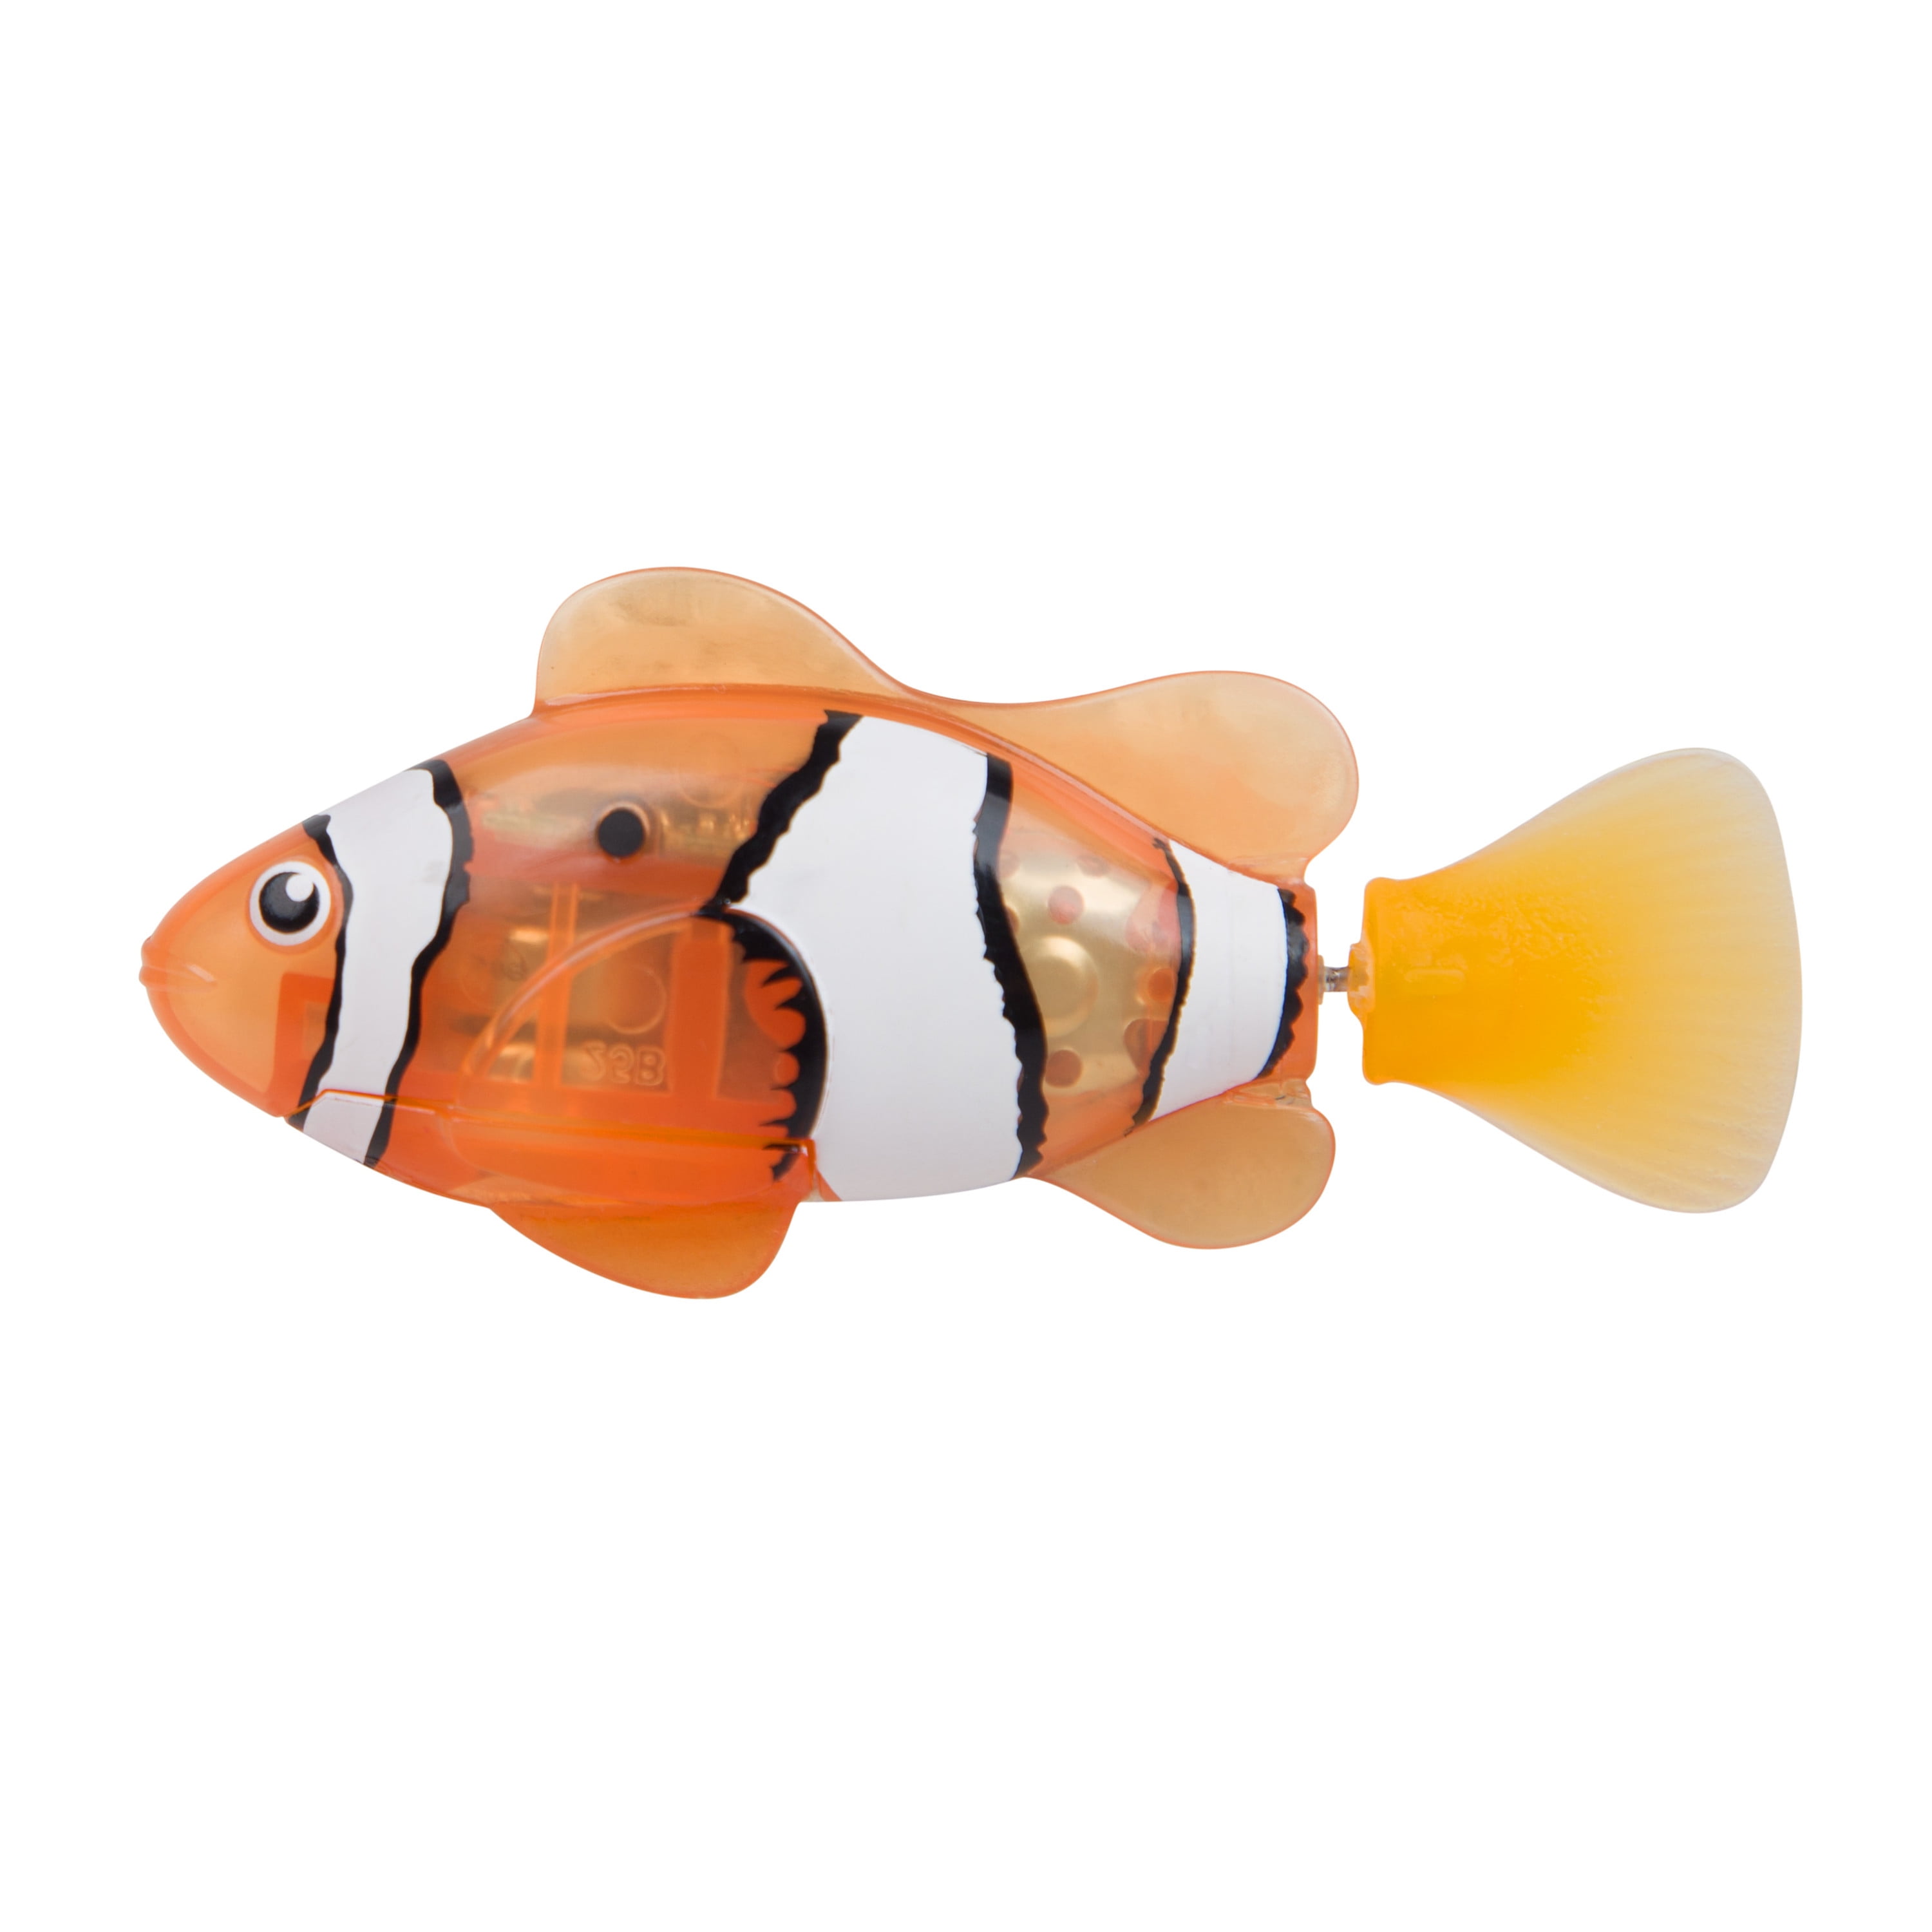 toy fish that swims in water